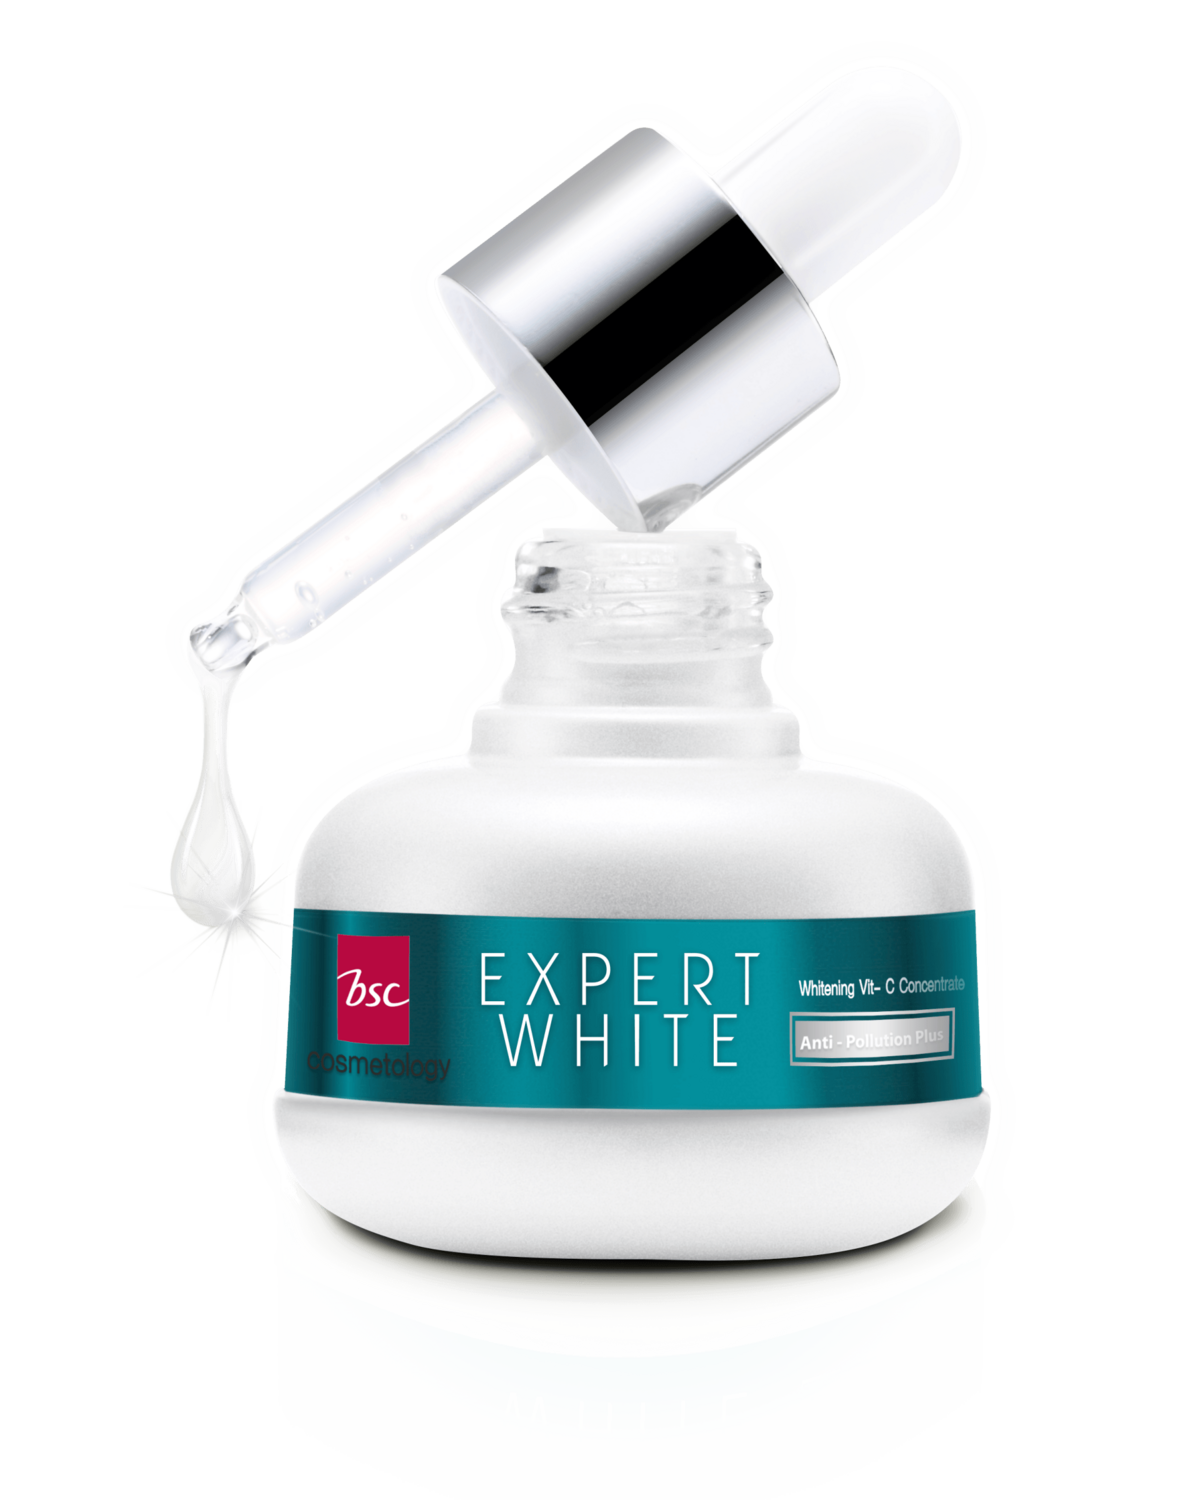 BSC EXPERT WHITE VIT-C CONCENTRATE ANTI – POLLUTION PLUS